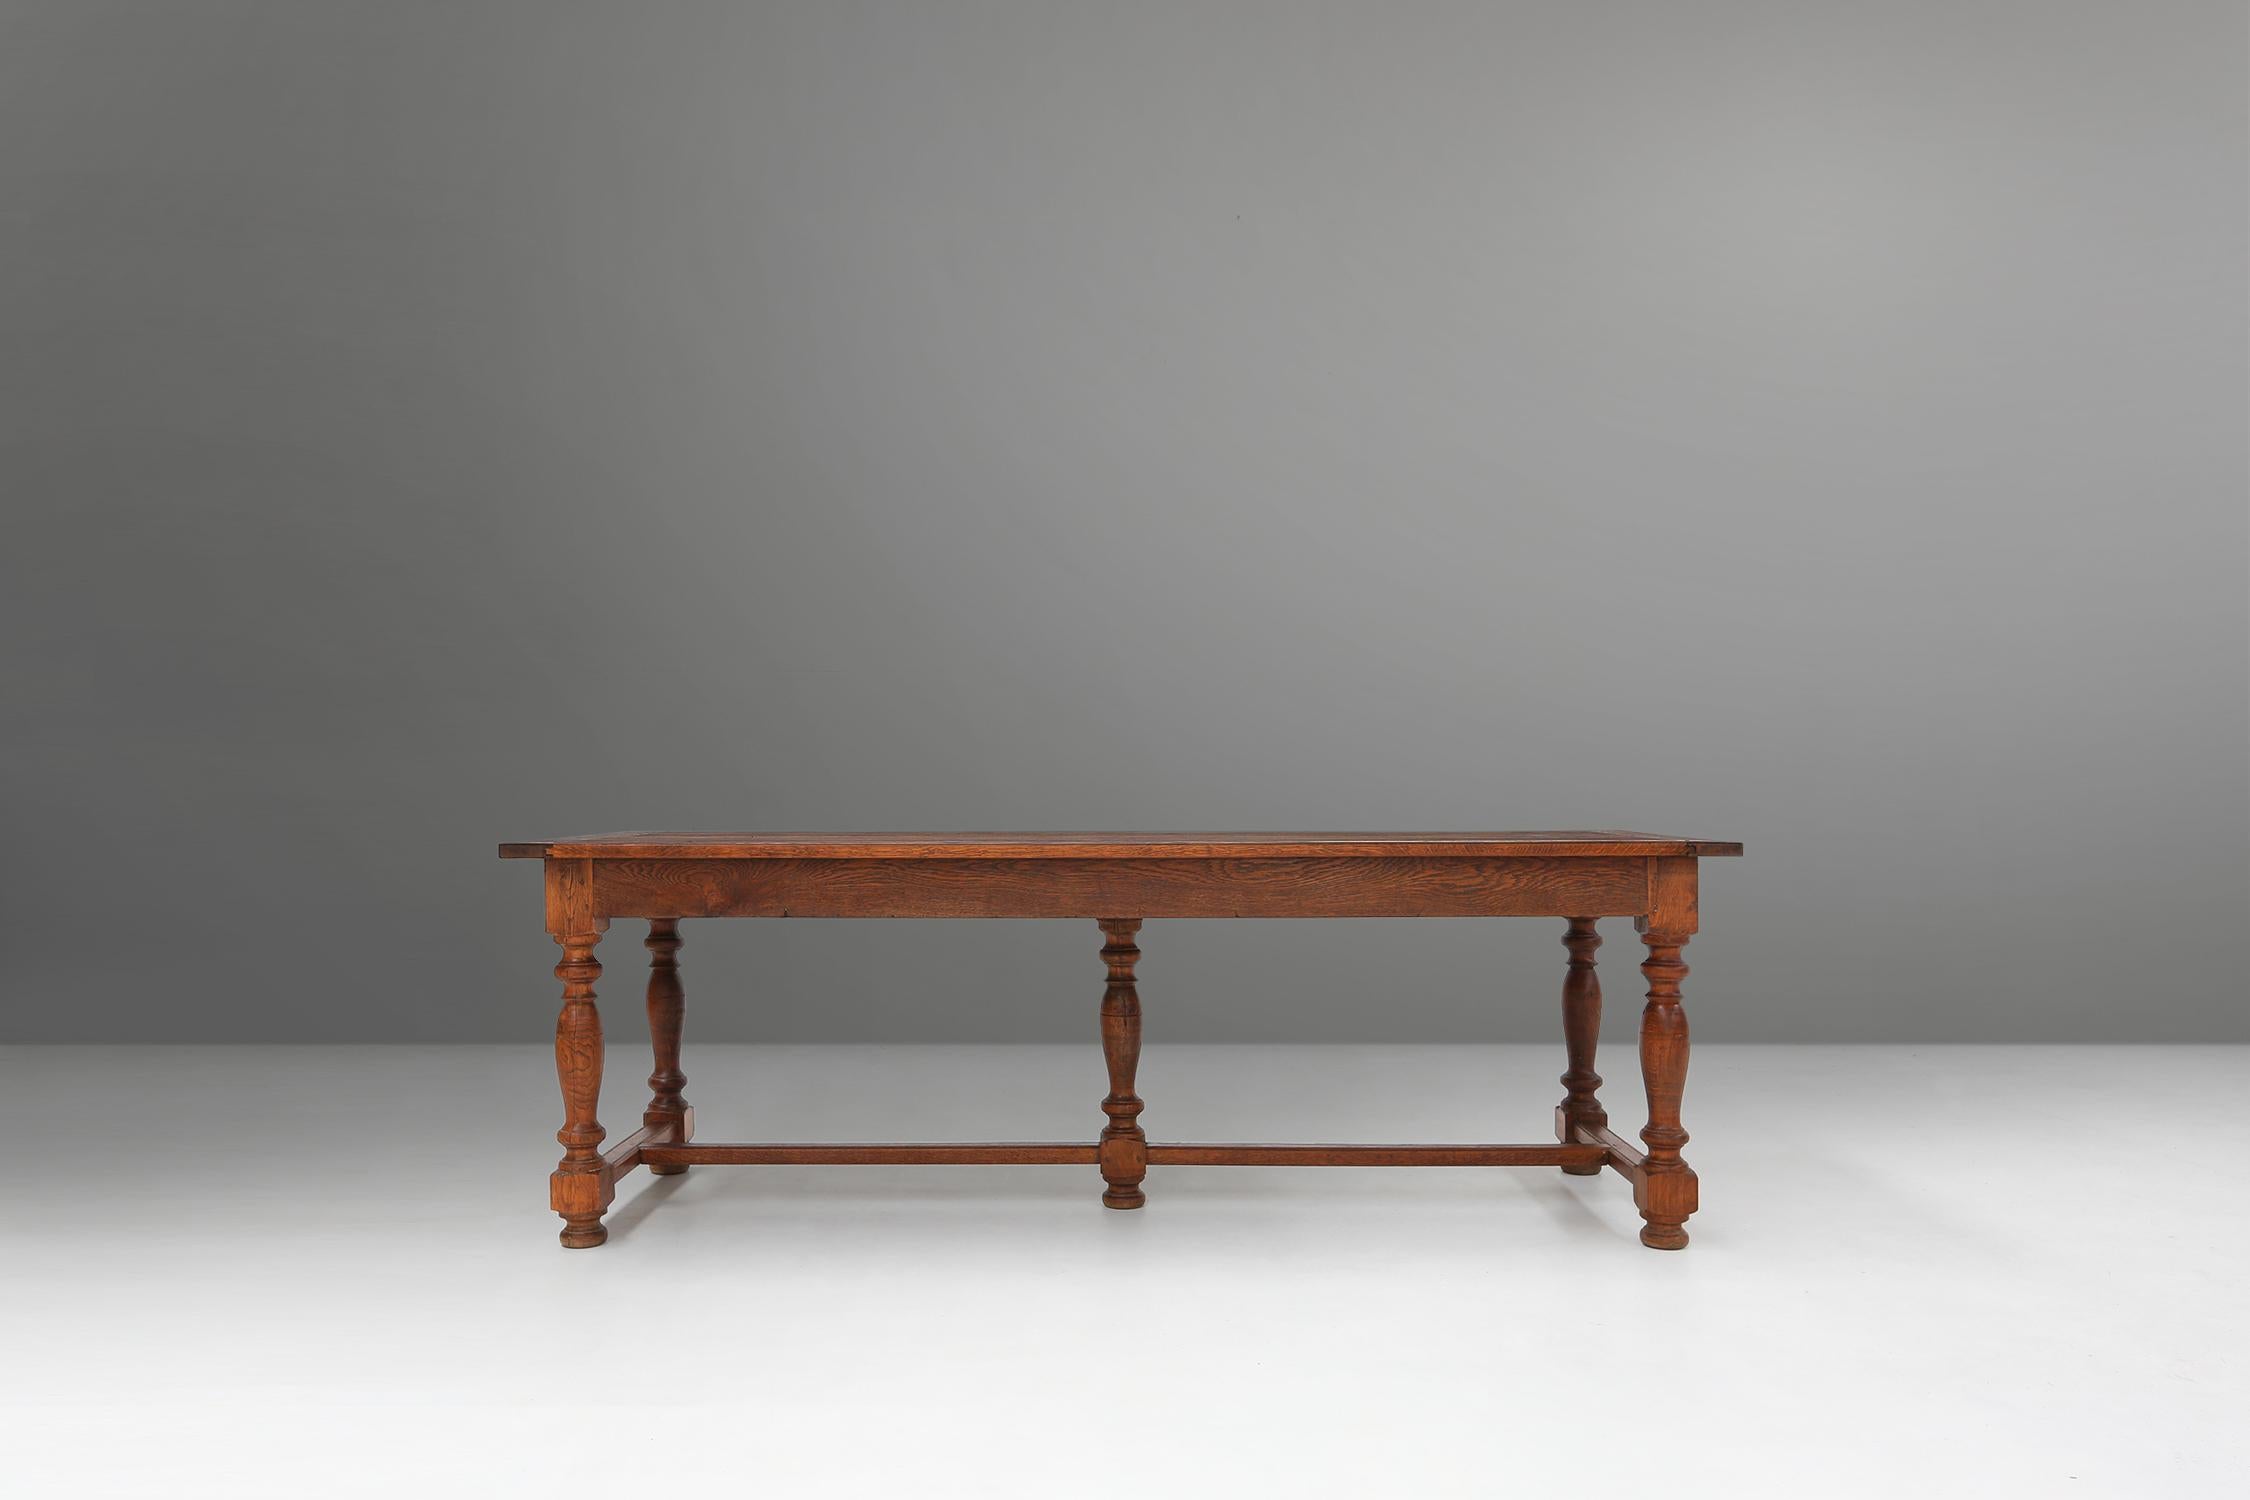 This table is made circa 1930s of solid oak and has a beautiful brown finish. The table has a rectangular top and five turned legs with spherical details. There are two drawers on either side of the table, where you can store your cutlery or other